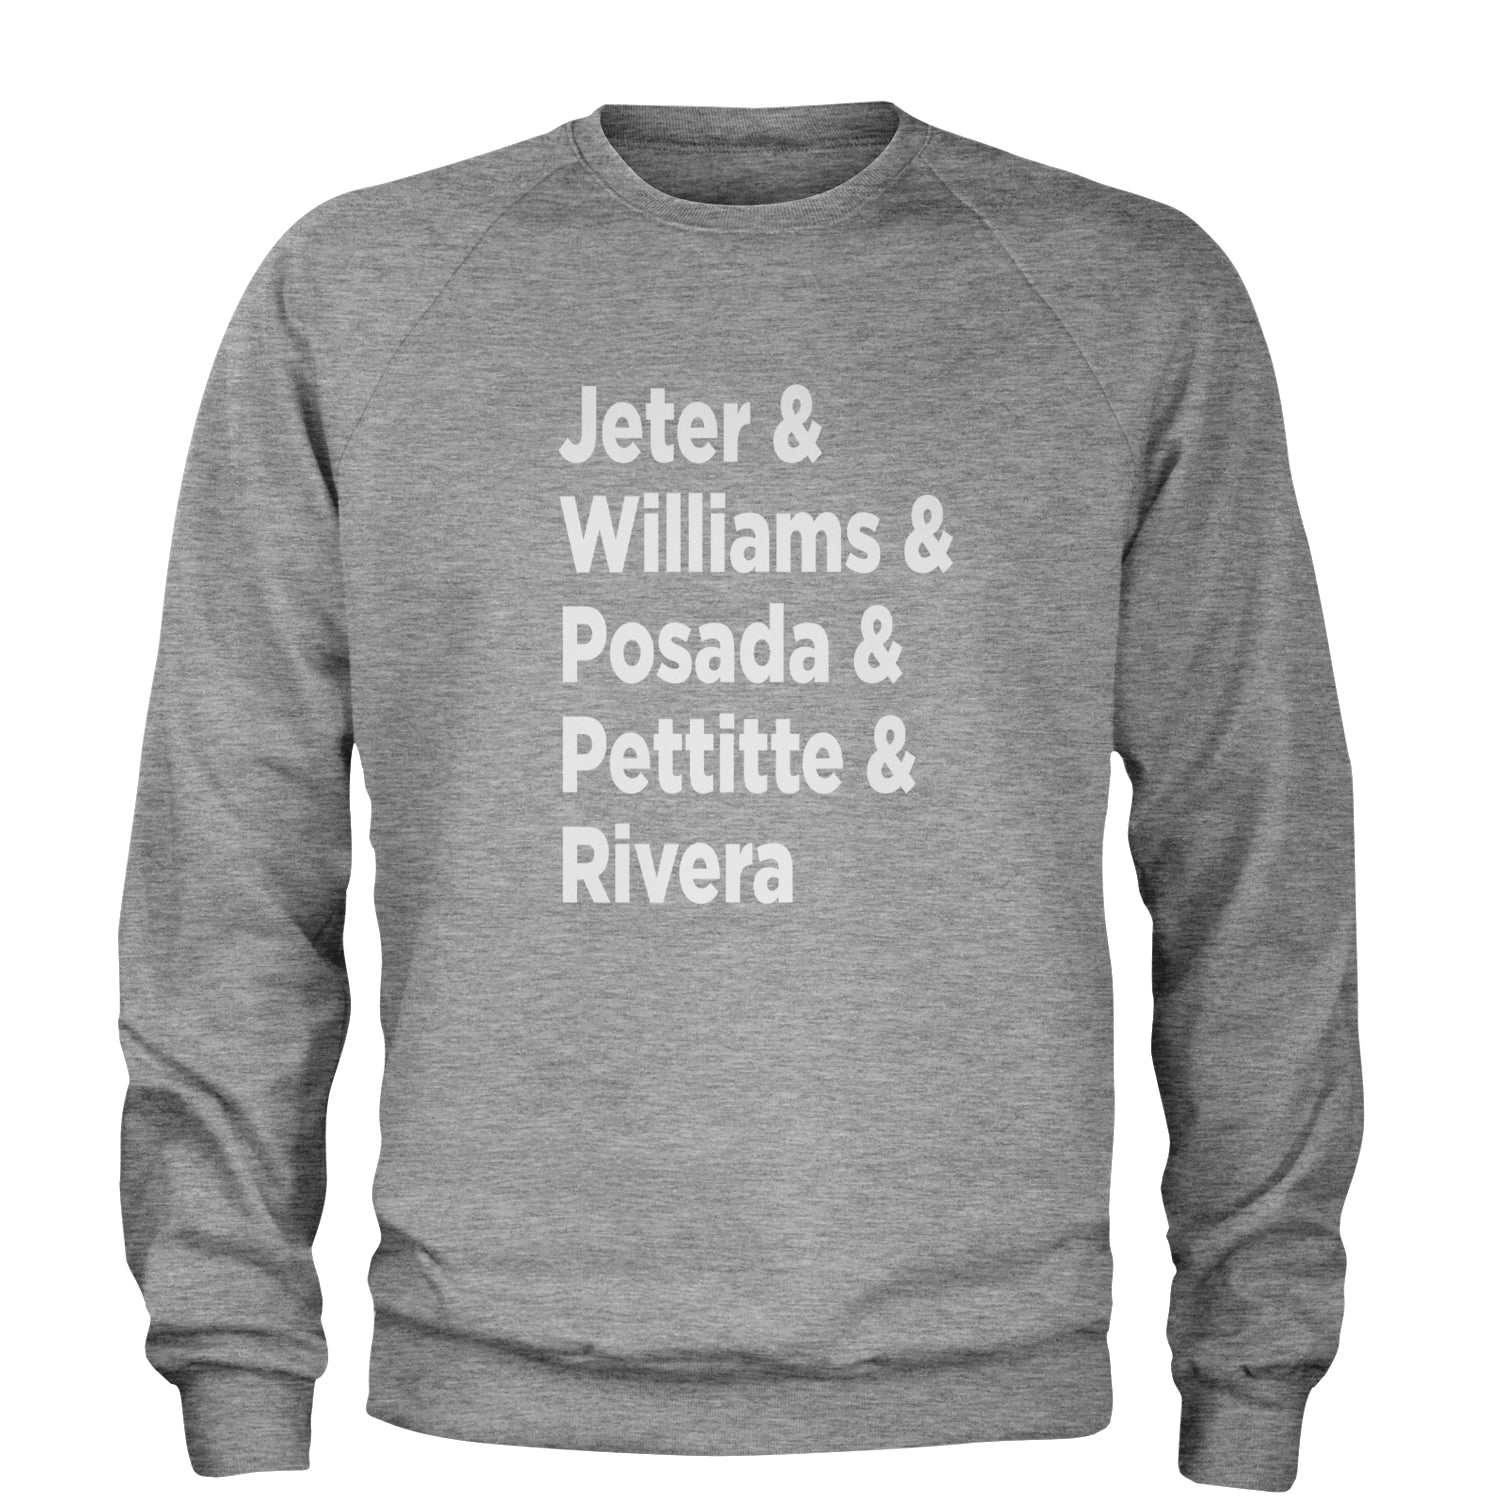 Jeter and Williams and Posada and Pettitte and Rivera Adult Crewneck Sweatshirt baseball, comes, here, judge, the by Expression Tees